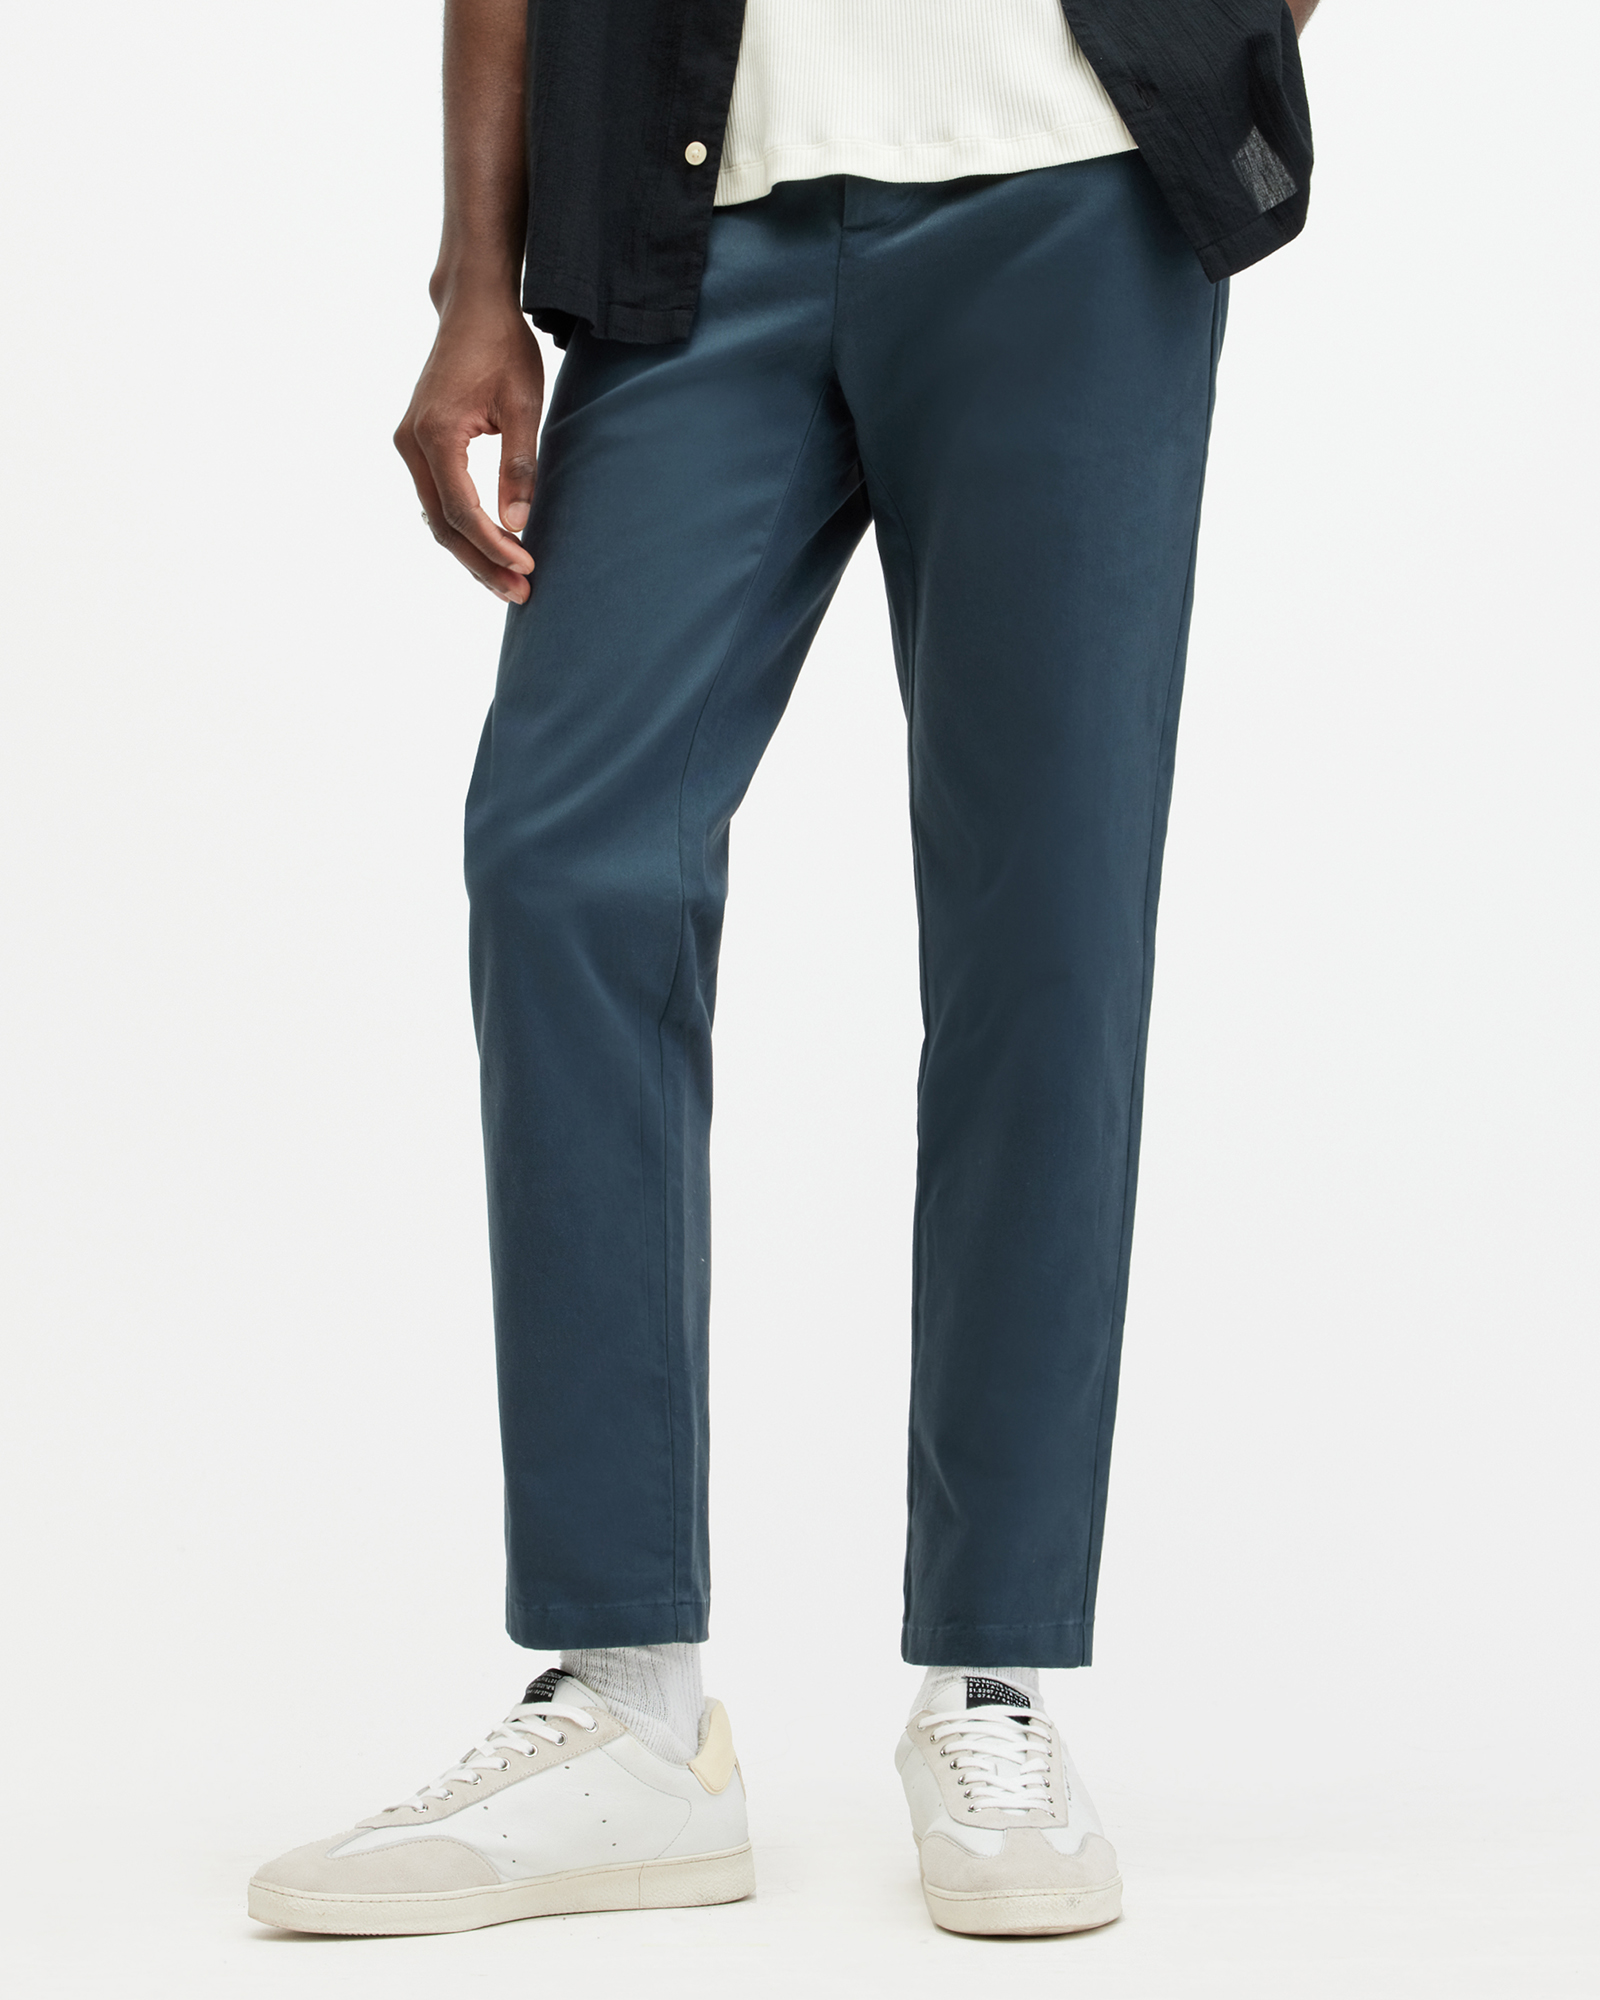 AllSaints Walde Skinny Fit Chino Trousers,, Workers Blue